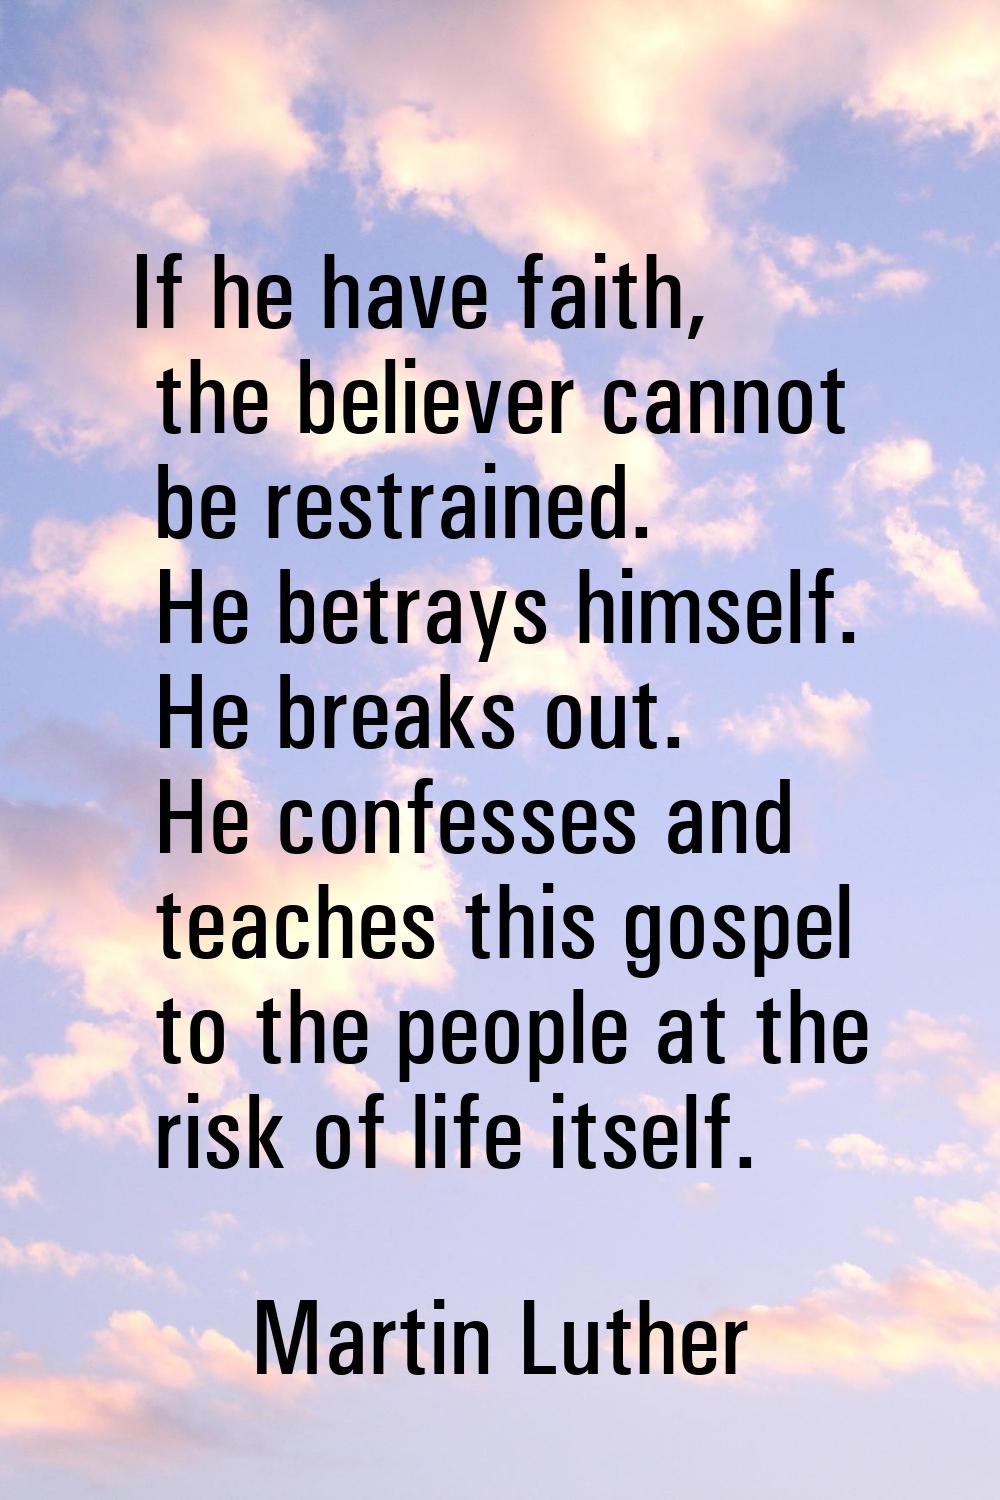 If he have faith, the believer cannot be restrained. He betrays himself. He breaks out. He confesse